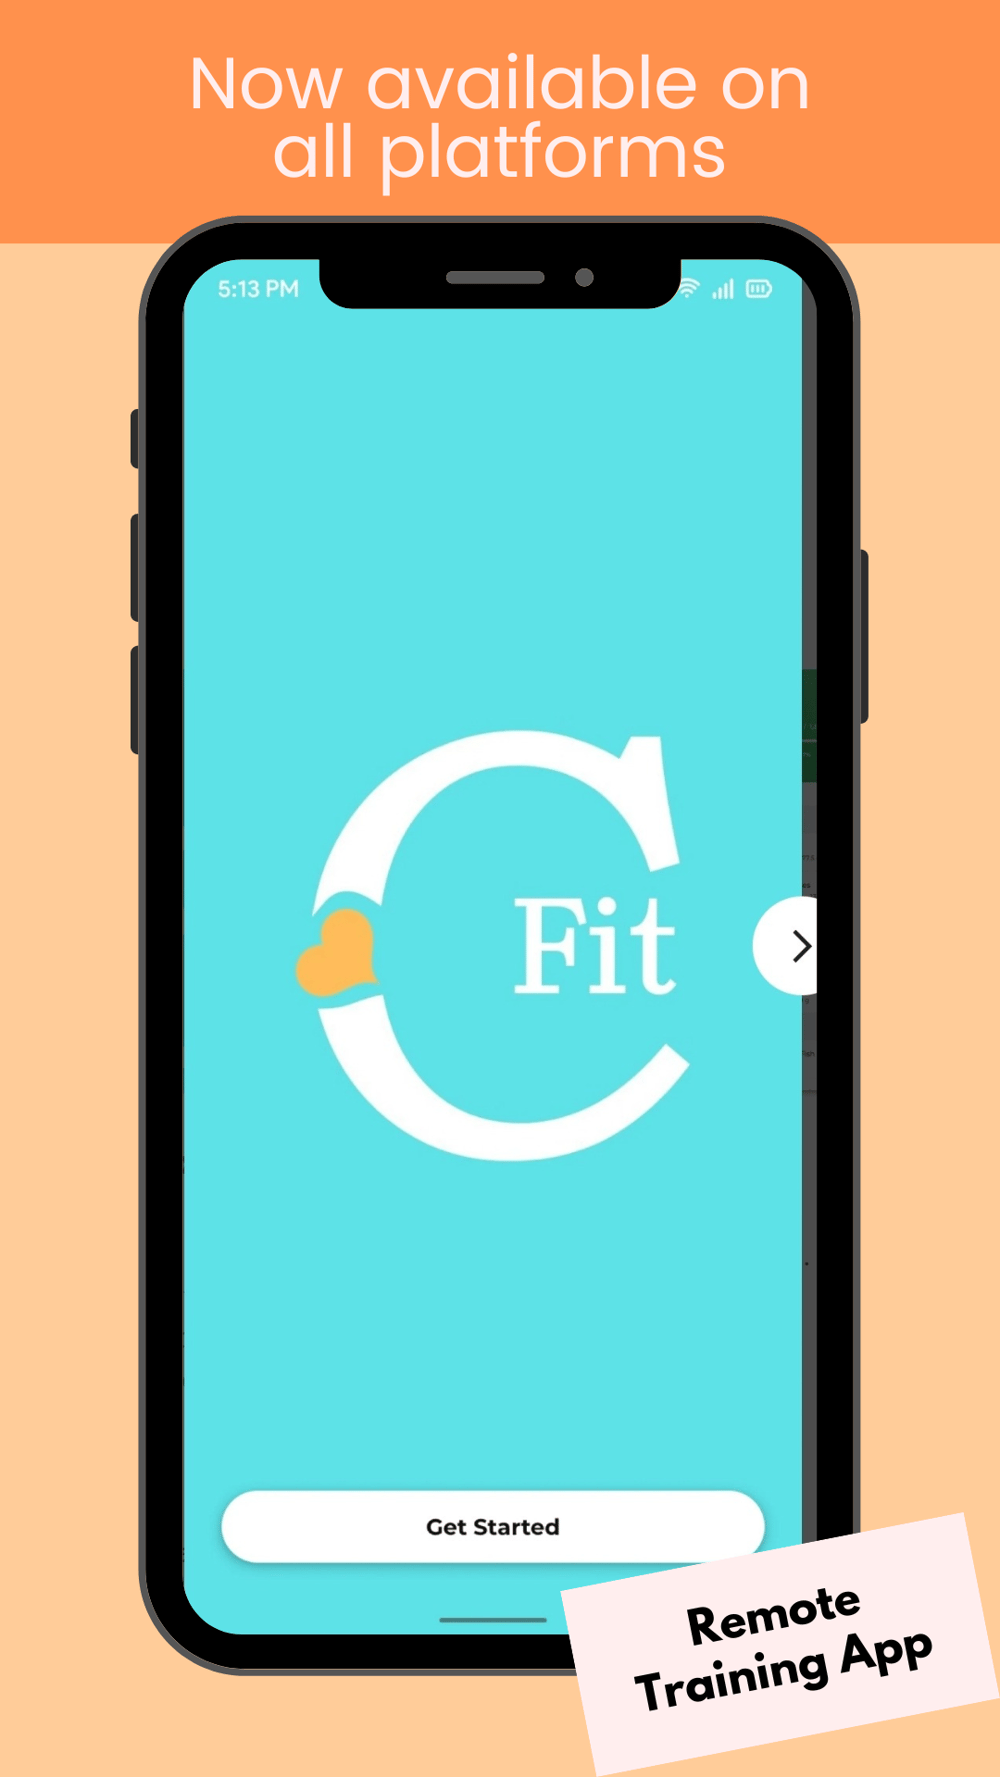 Image of cell phone displaying the C-Fit app on it, available on all platforms for remote fitness training